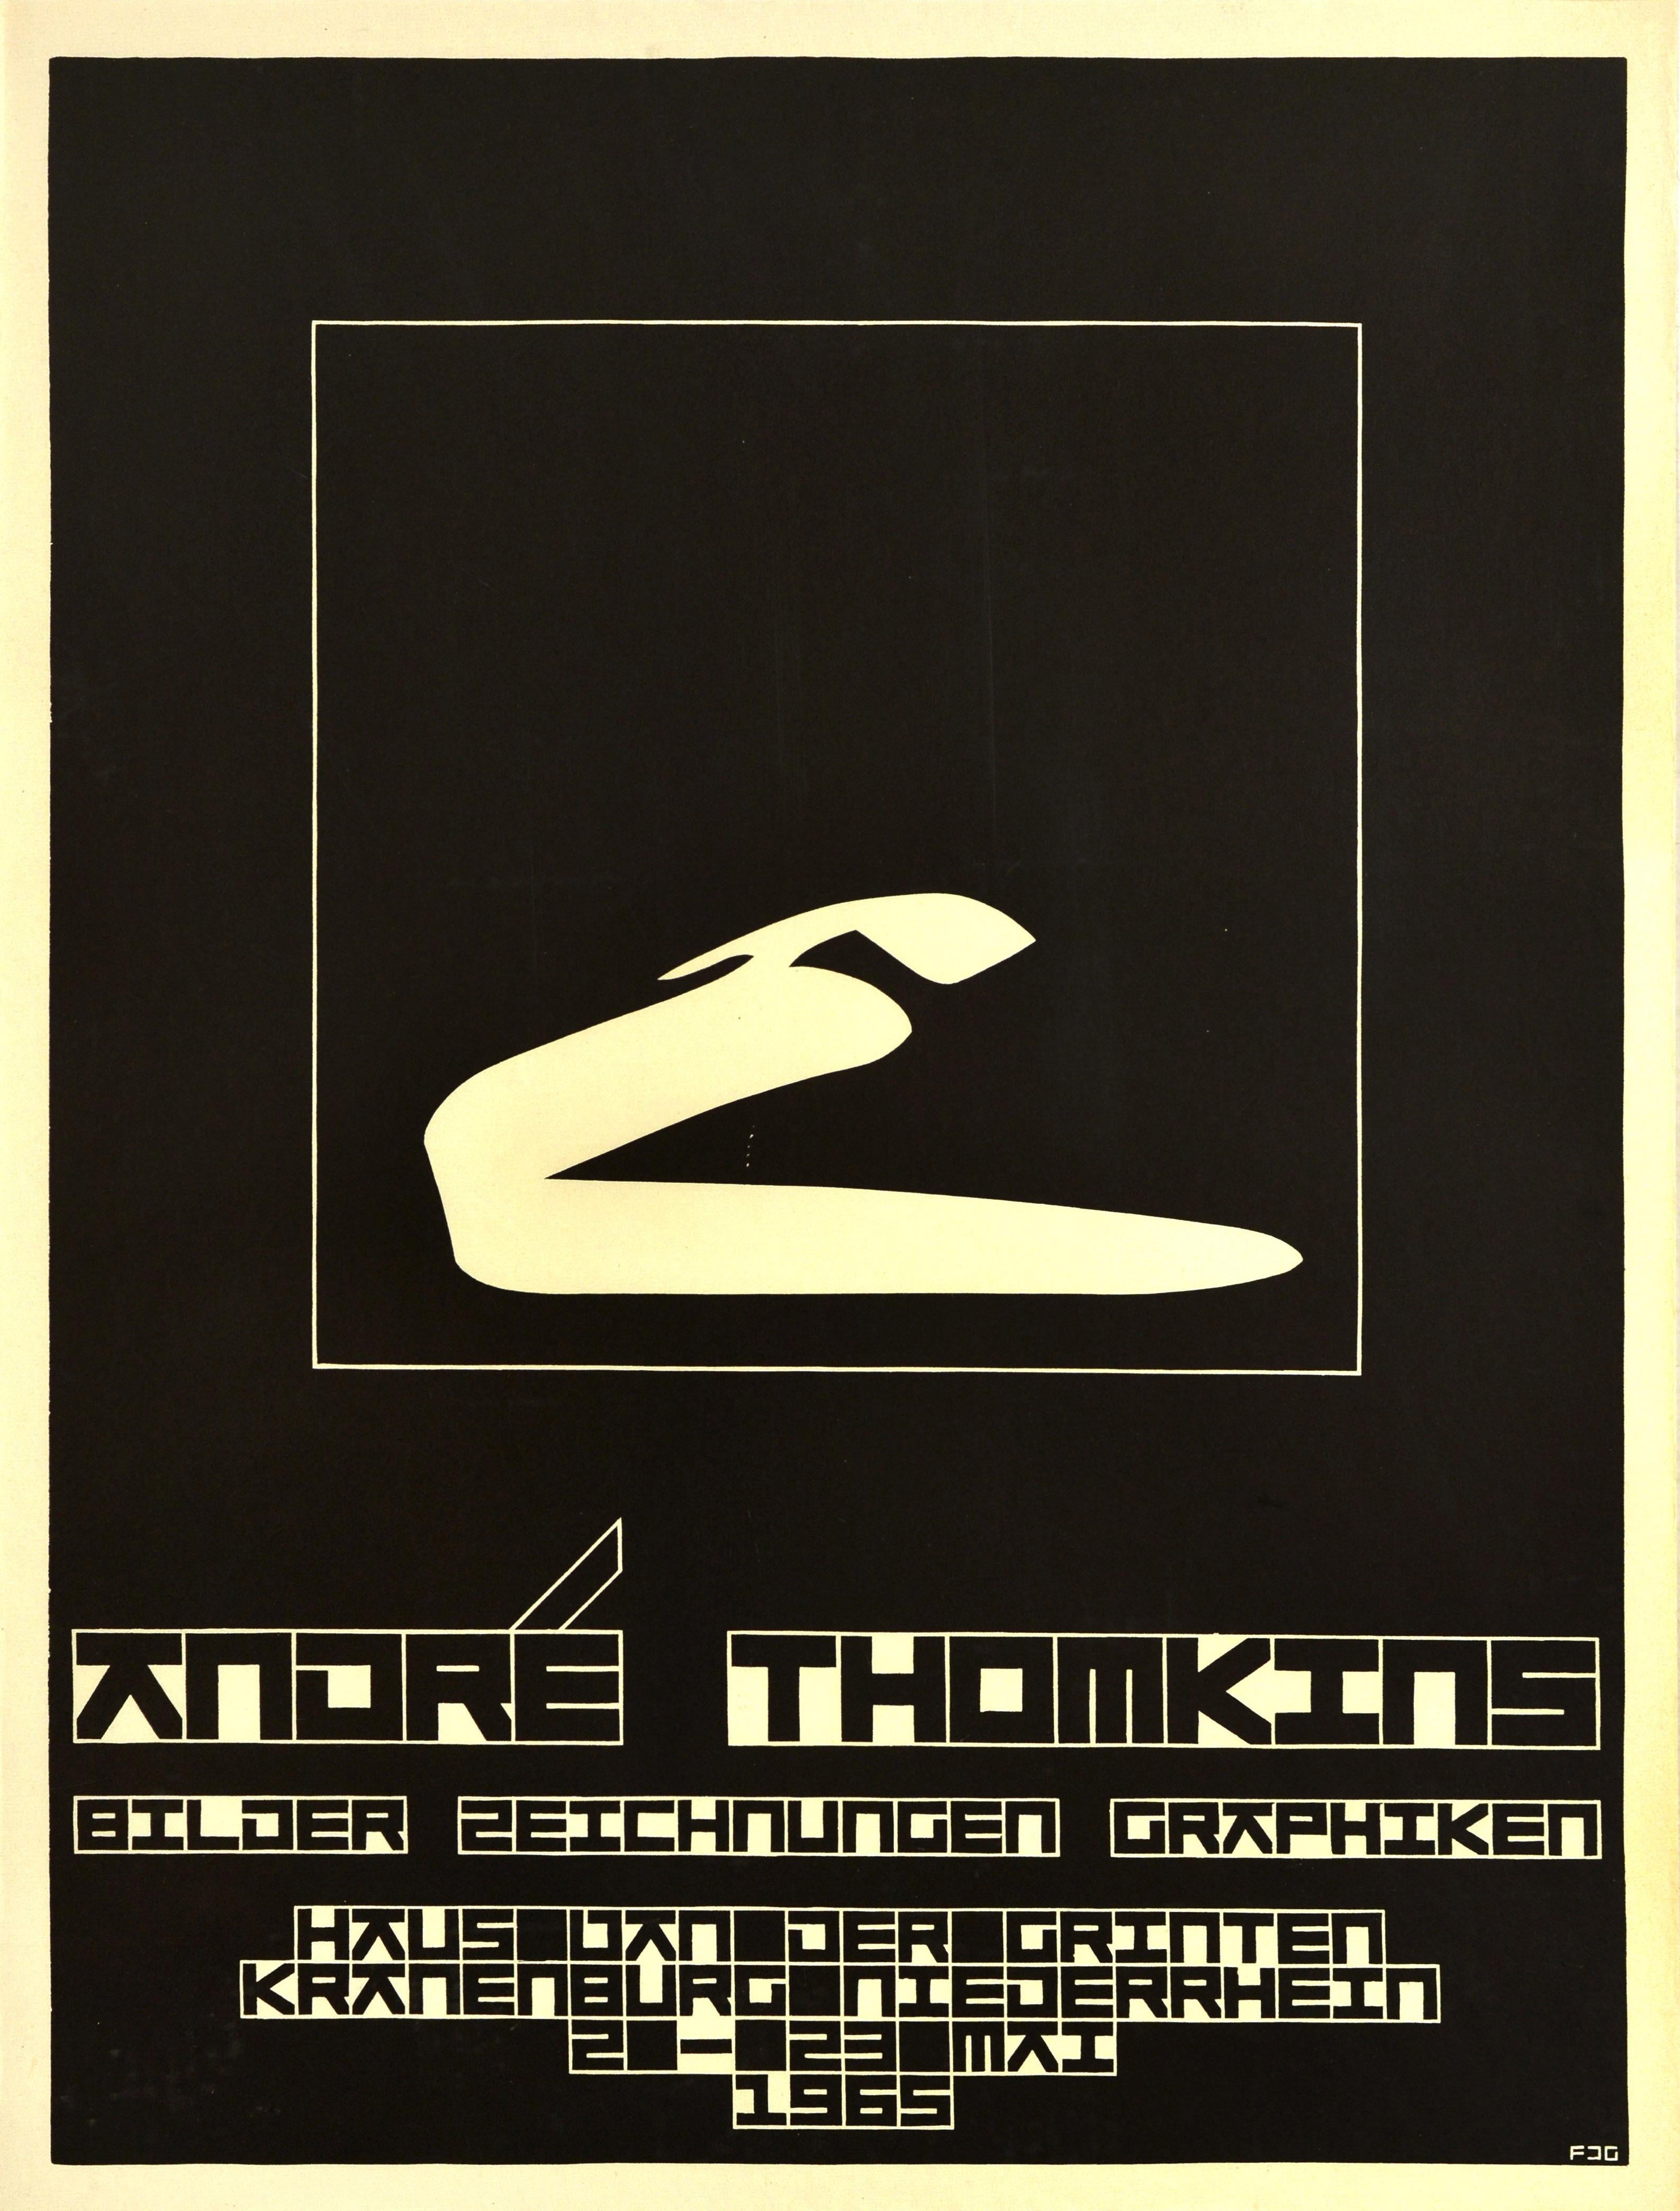 Unknown Print - Original Vintage Advertising Poster Andre Thomkins Pictures Exhibition Dadaism